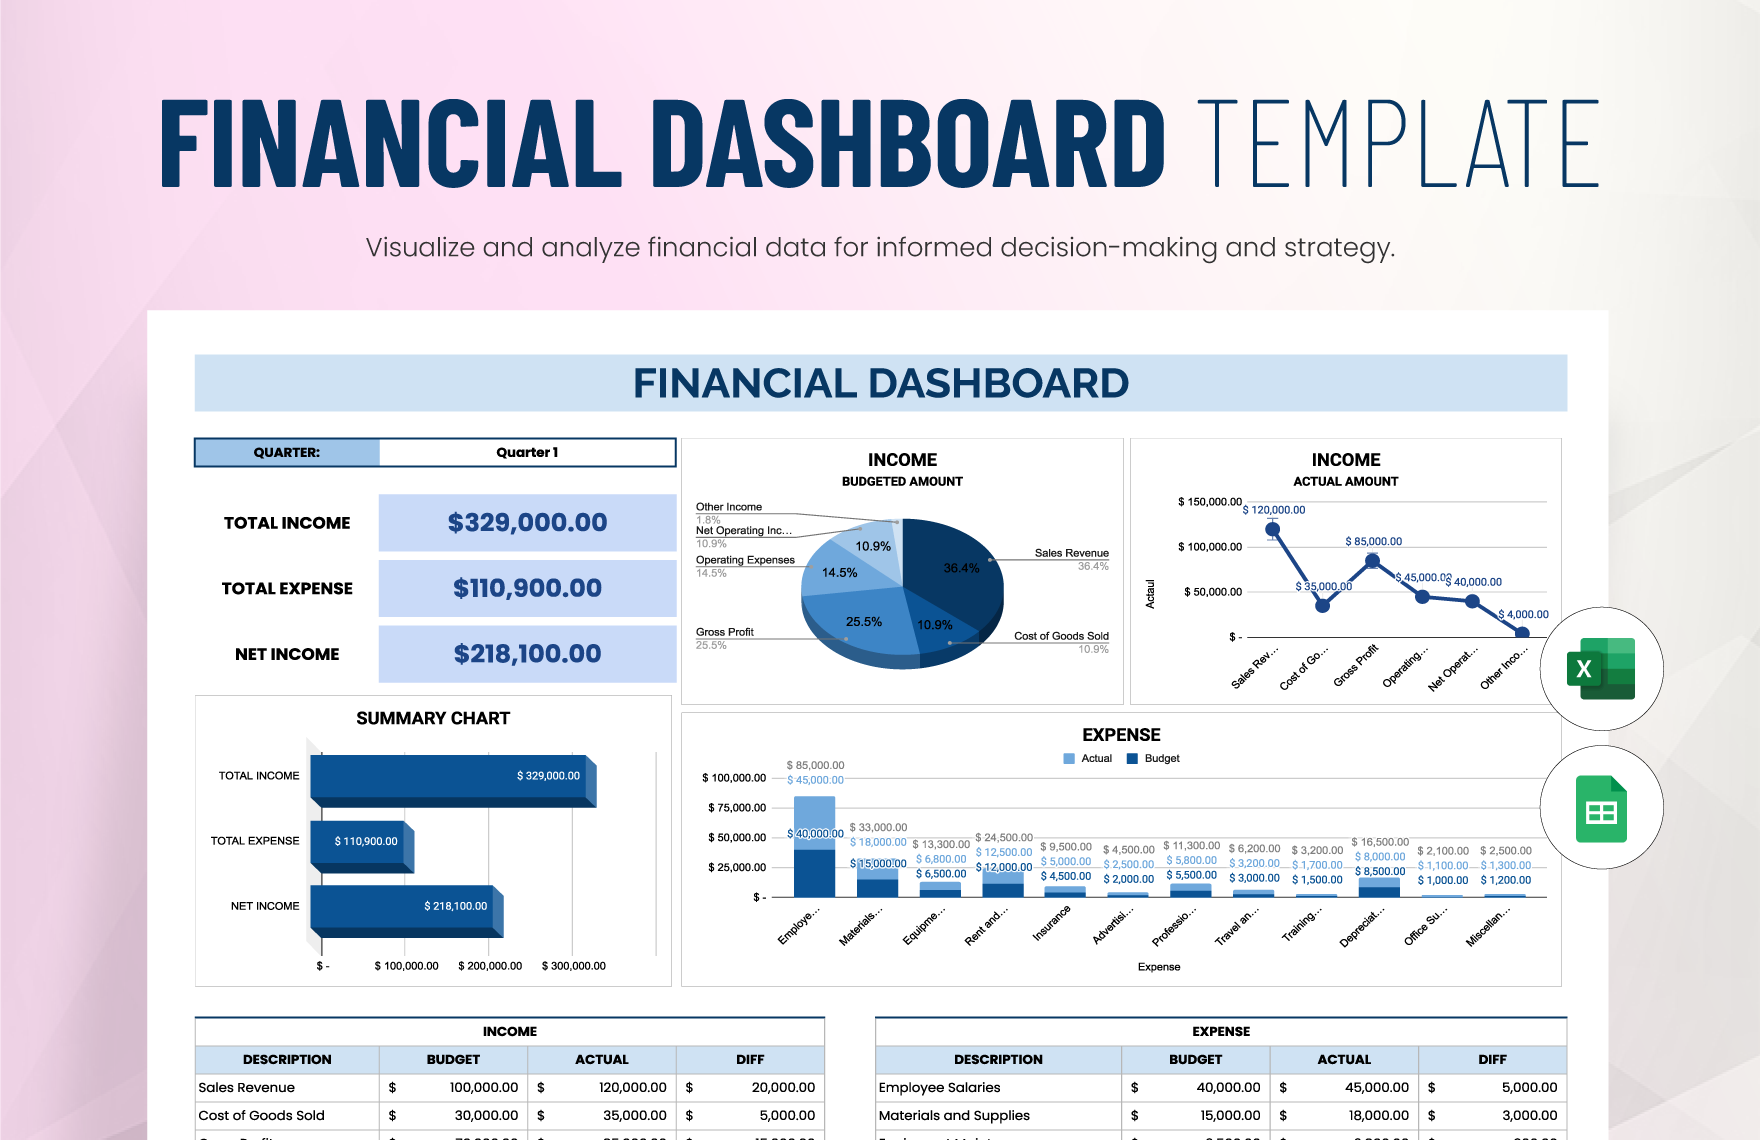 Financial Dashboard Template in Excel, Google Sheets